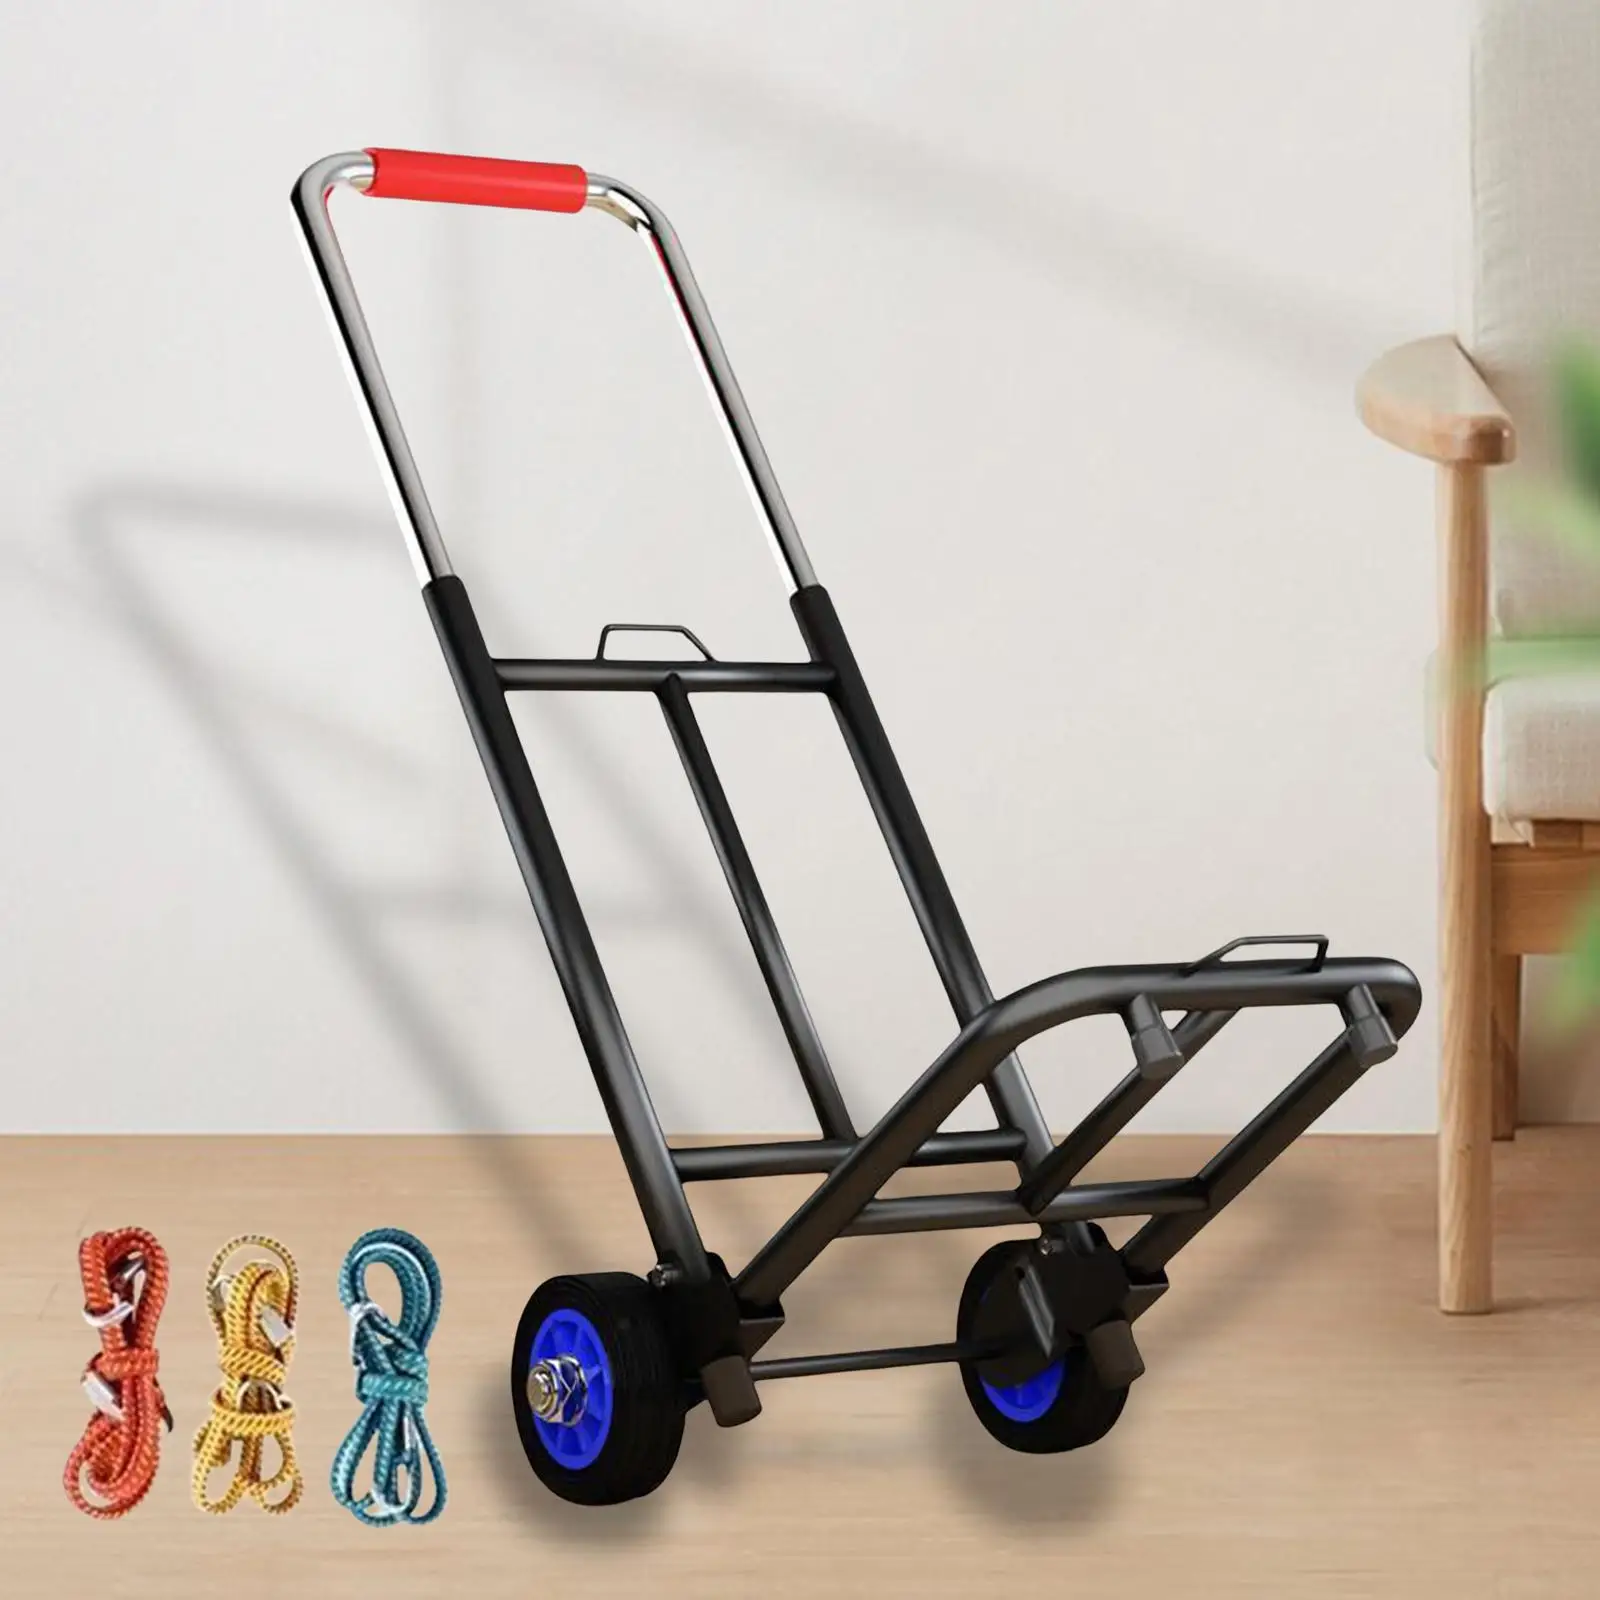 Foldable Hand Truck Dolly Adjustable Handle for Shopping, Office Portable